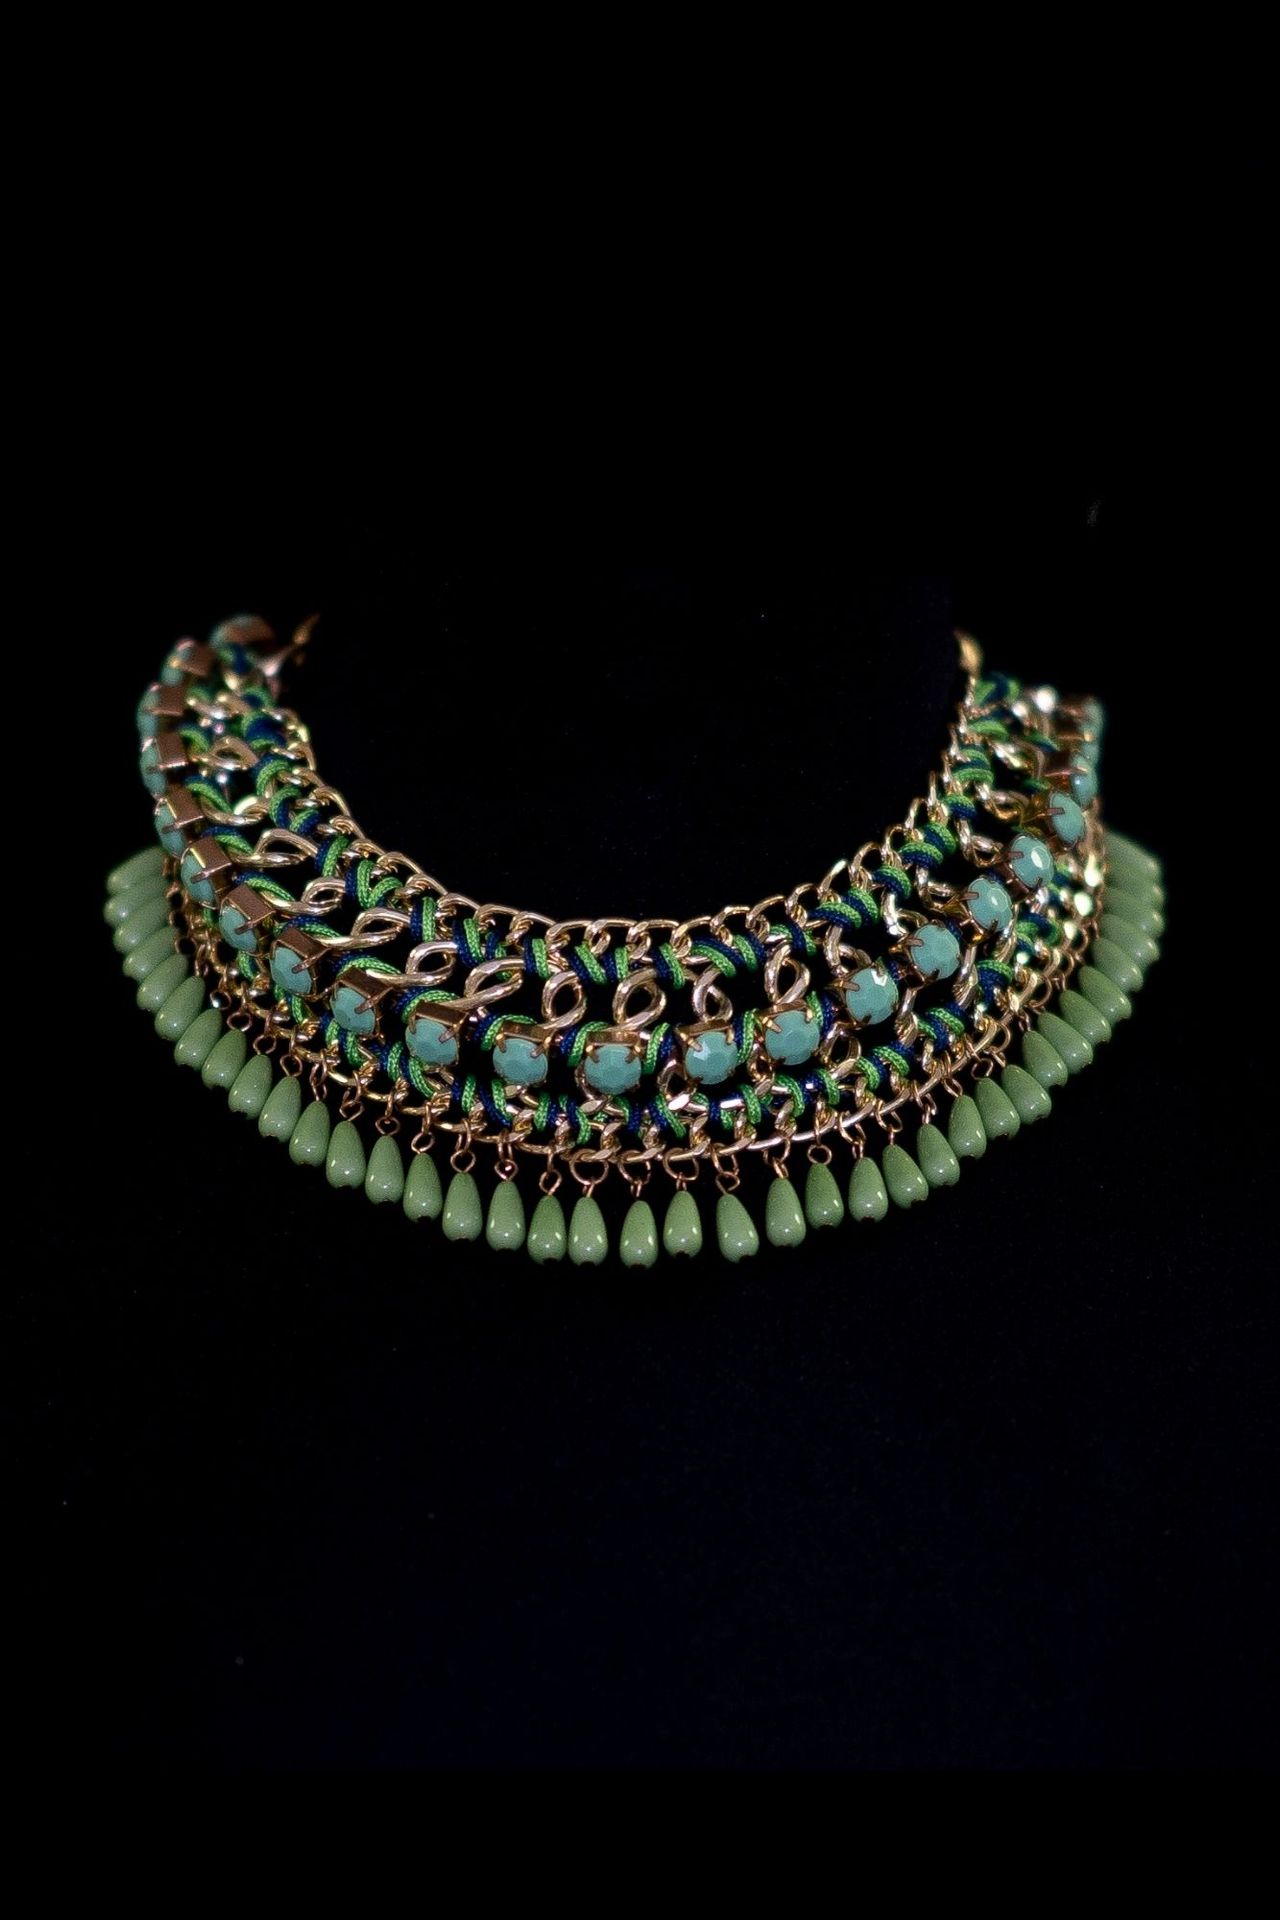 Collier antique Necklace made of turquoise pearl weaving of recovery.